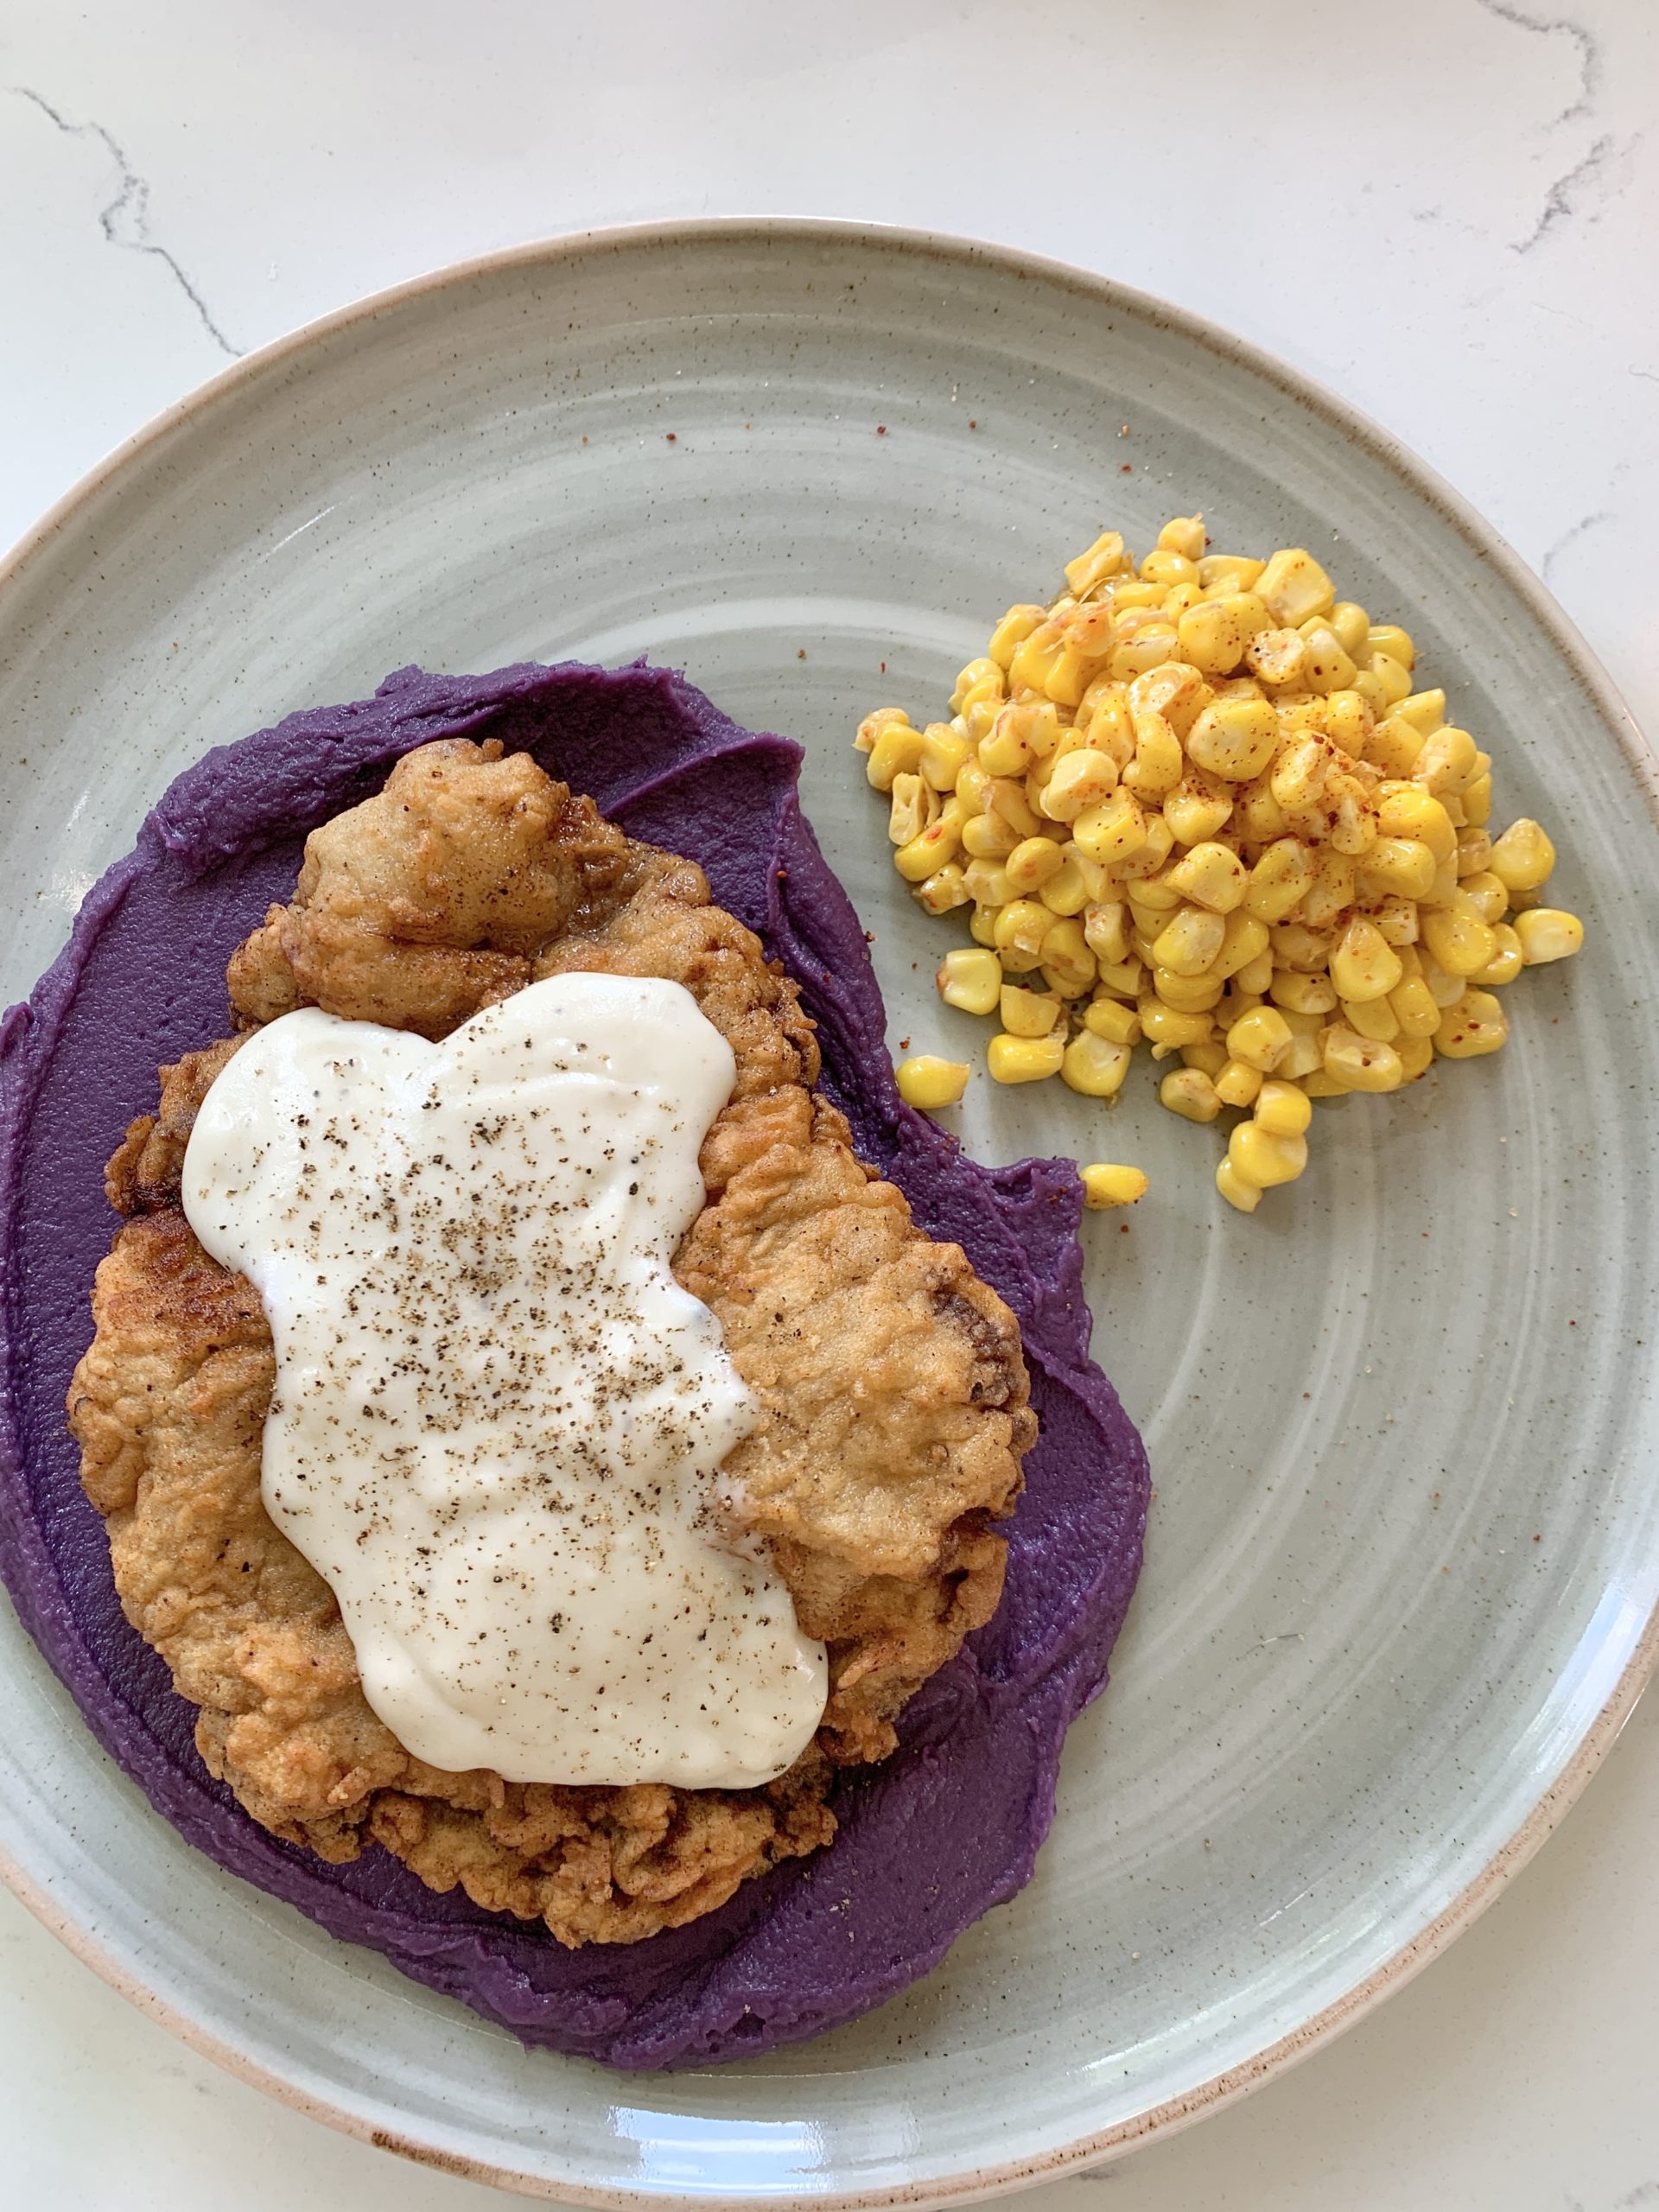 Chicken fried steak on a bed of mashed purple sweet potatoes